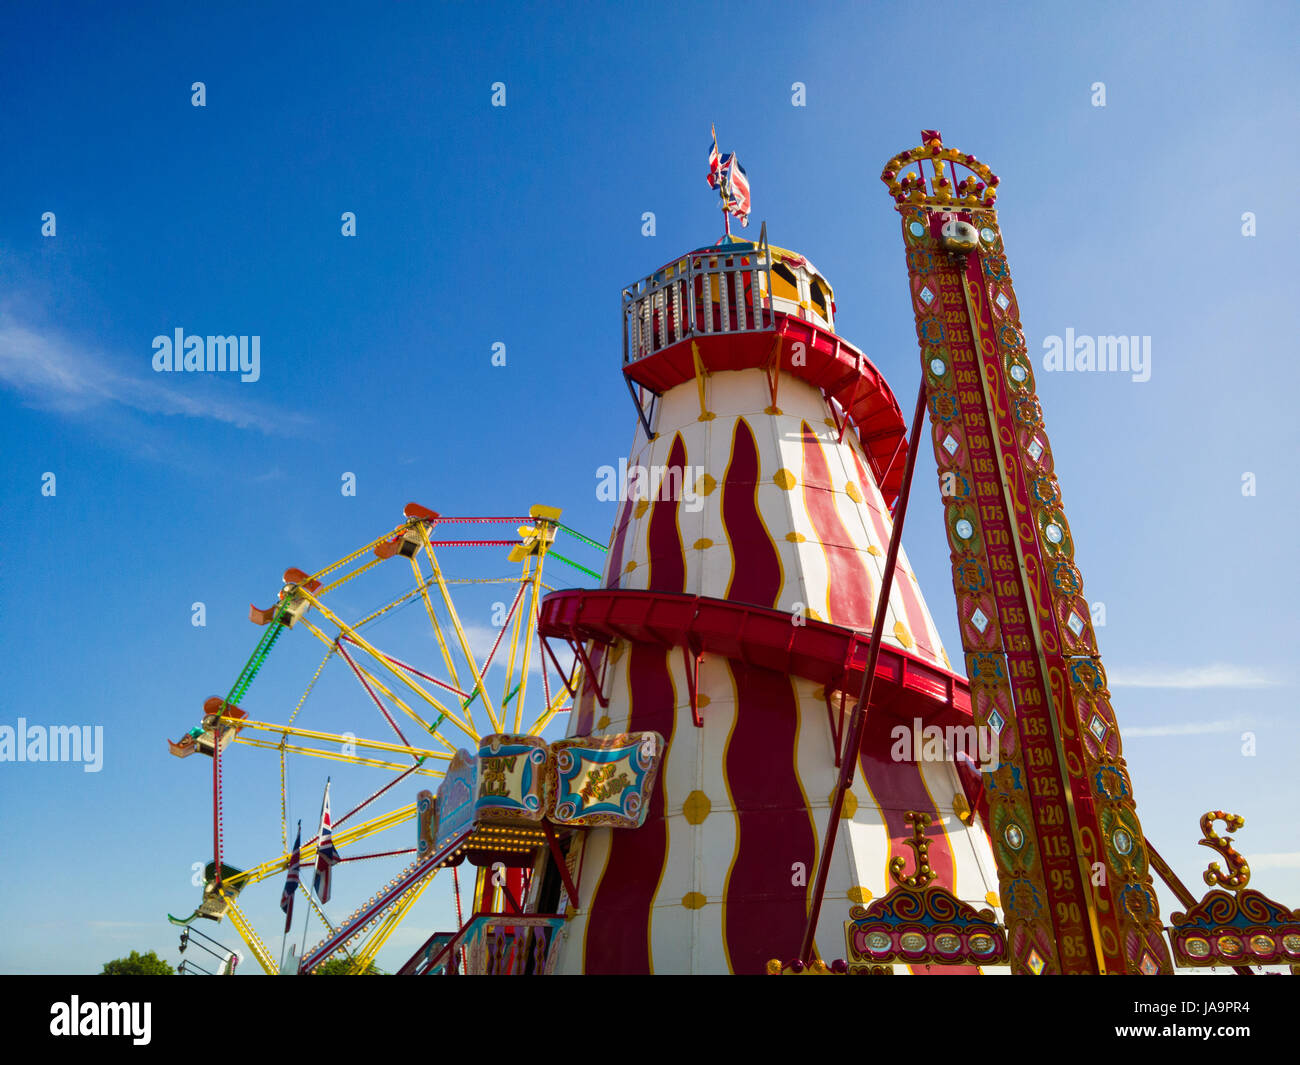 A Ferris wheel, helter skelter and a high striker game at the funfair at the Bath and West Show, Shepton Mallet, Somerset, England. Stock Photo